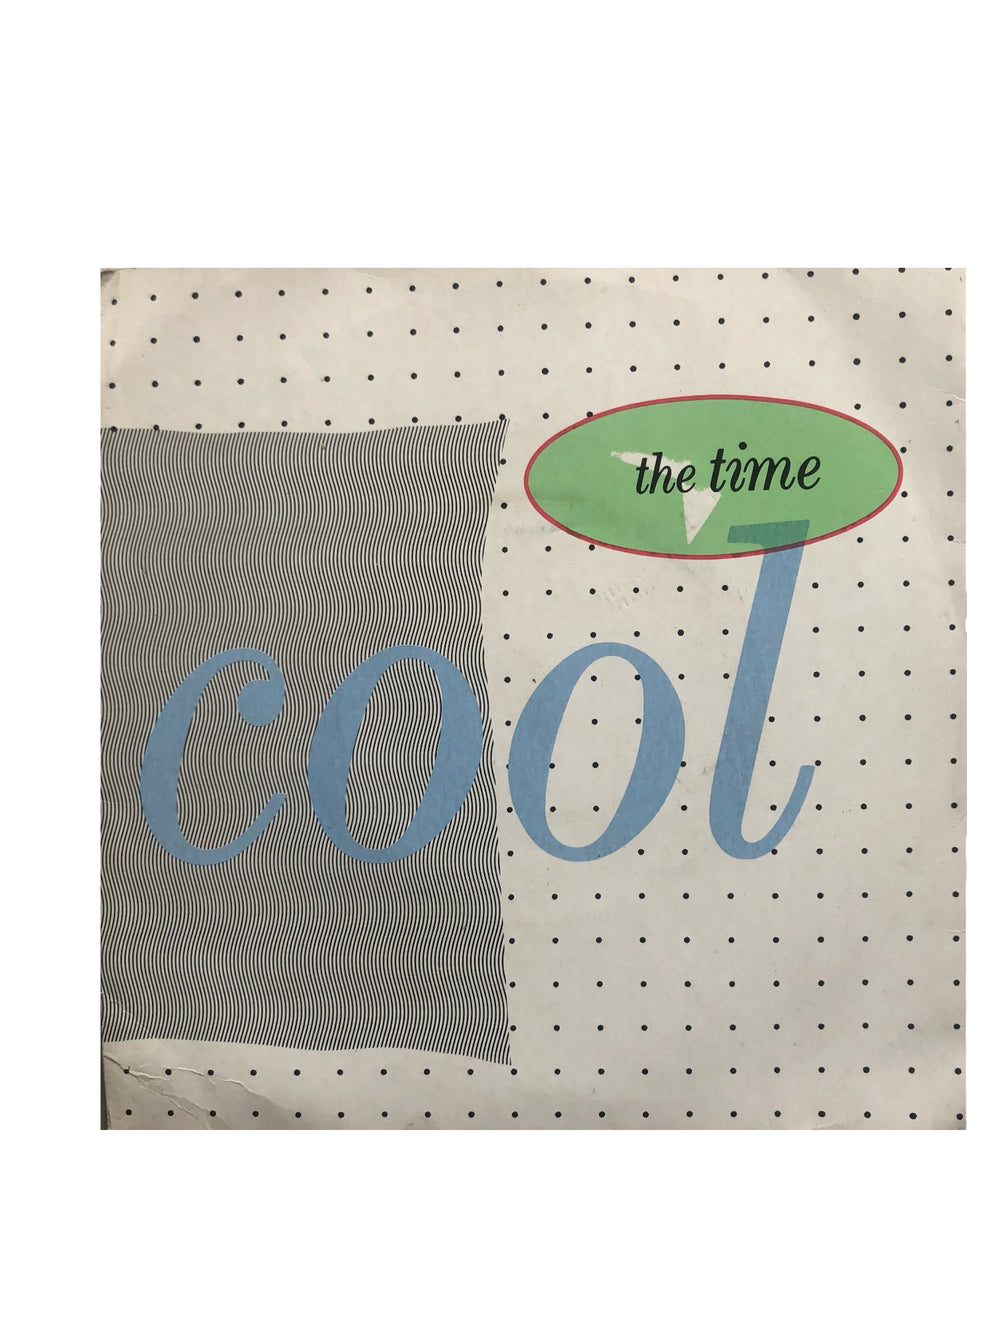 Prince – The Time Cool Vinyl 7" Single UK Picture Sleeve Preloved: 1981